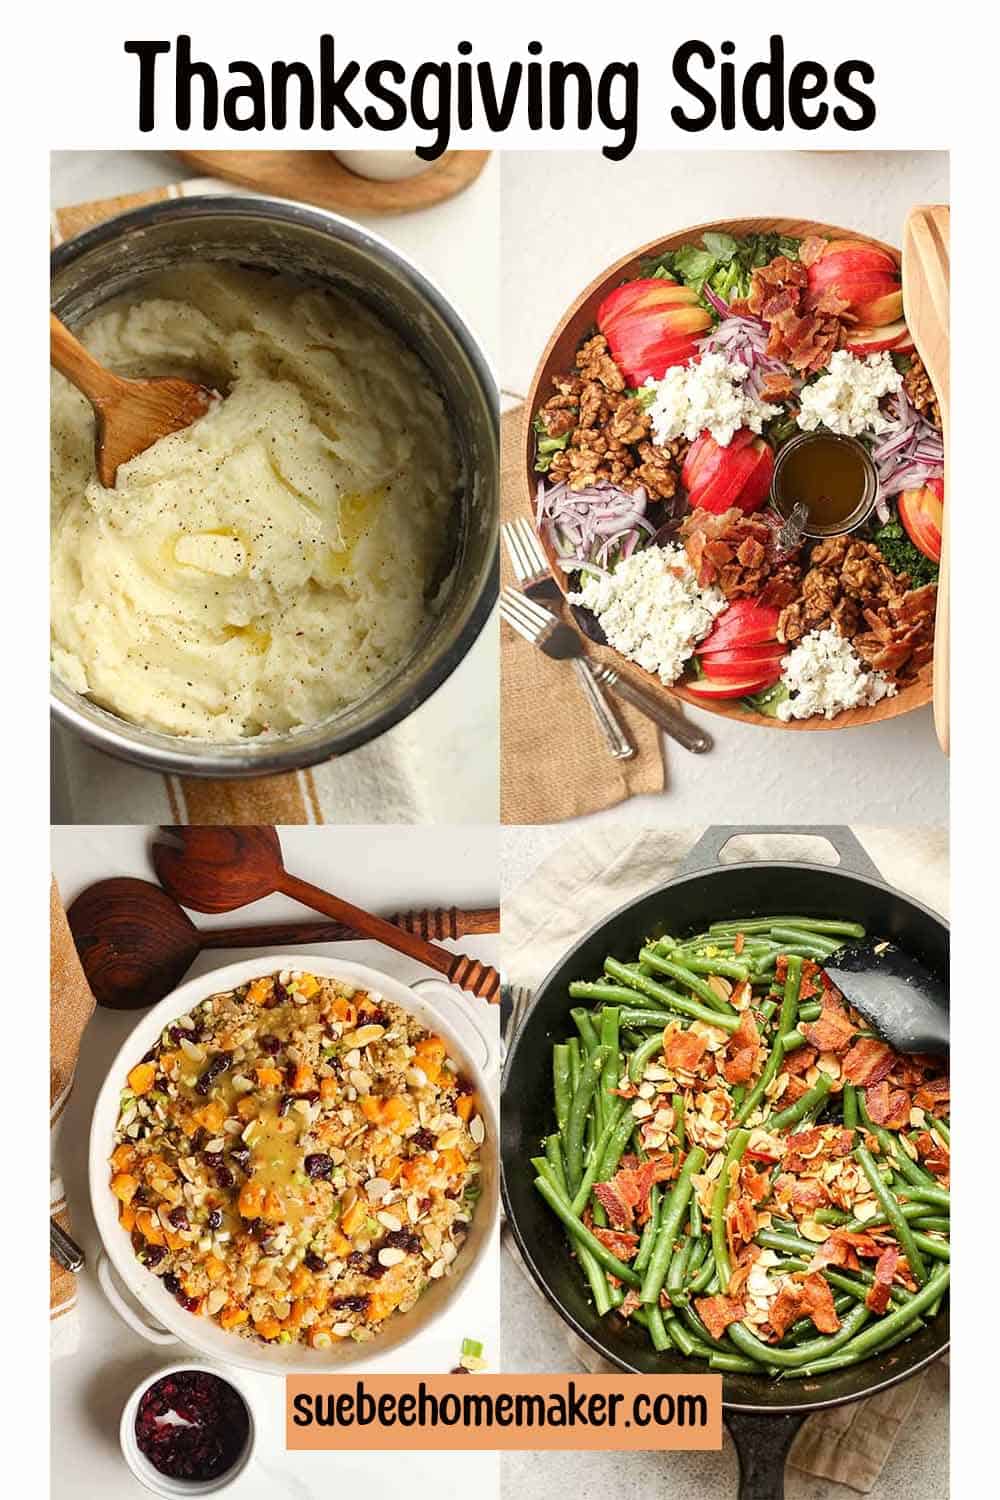 A collage of Thanksgiving side dishes.